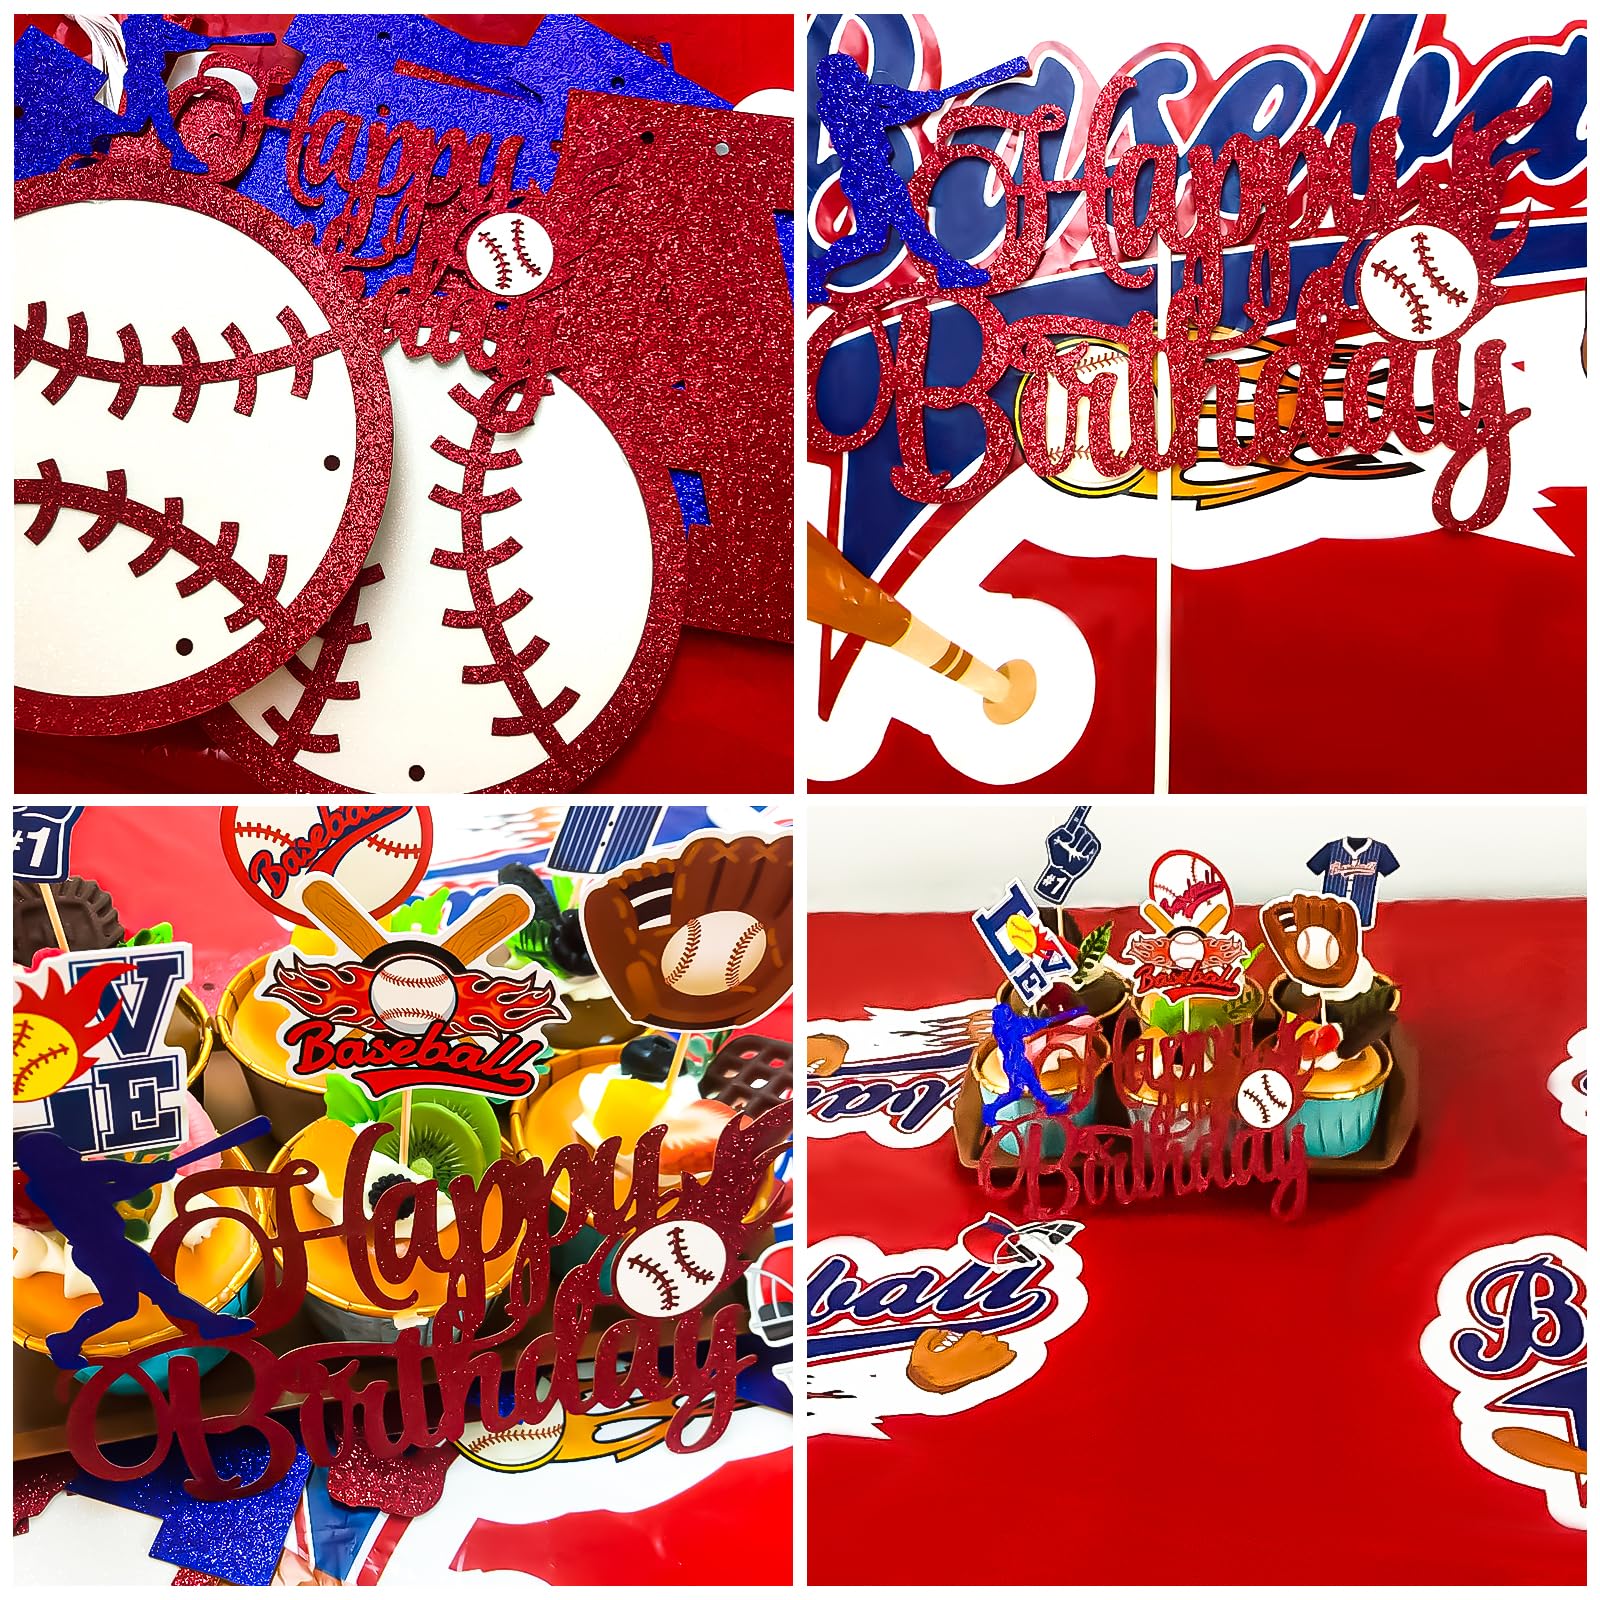 Baseball Birthday Party Decorations, Baseball Balloons Party Supplies, Including Navy Blue Balloons, Baseball theme Background, Tablecloth, Happy Birthday Banner, Cupcake/Cake Toppers